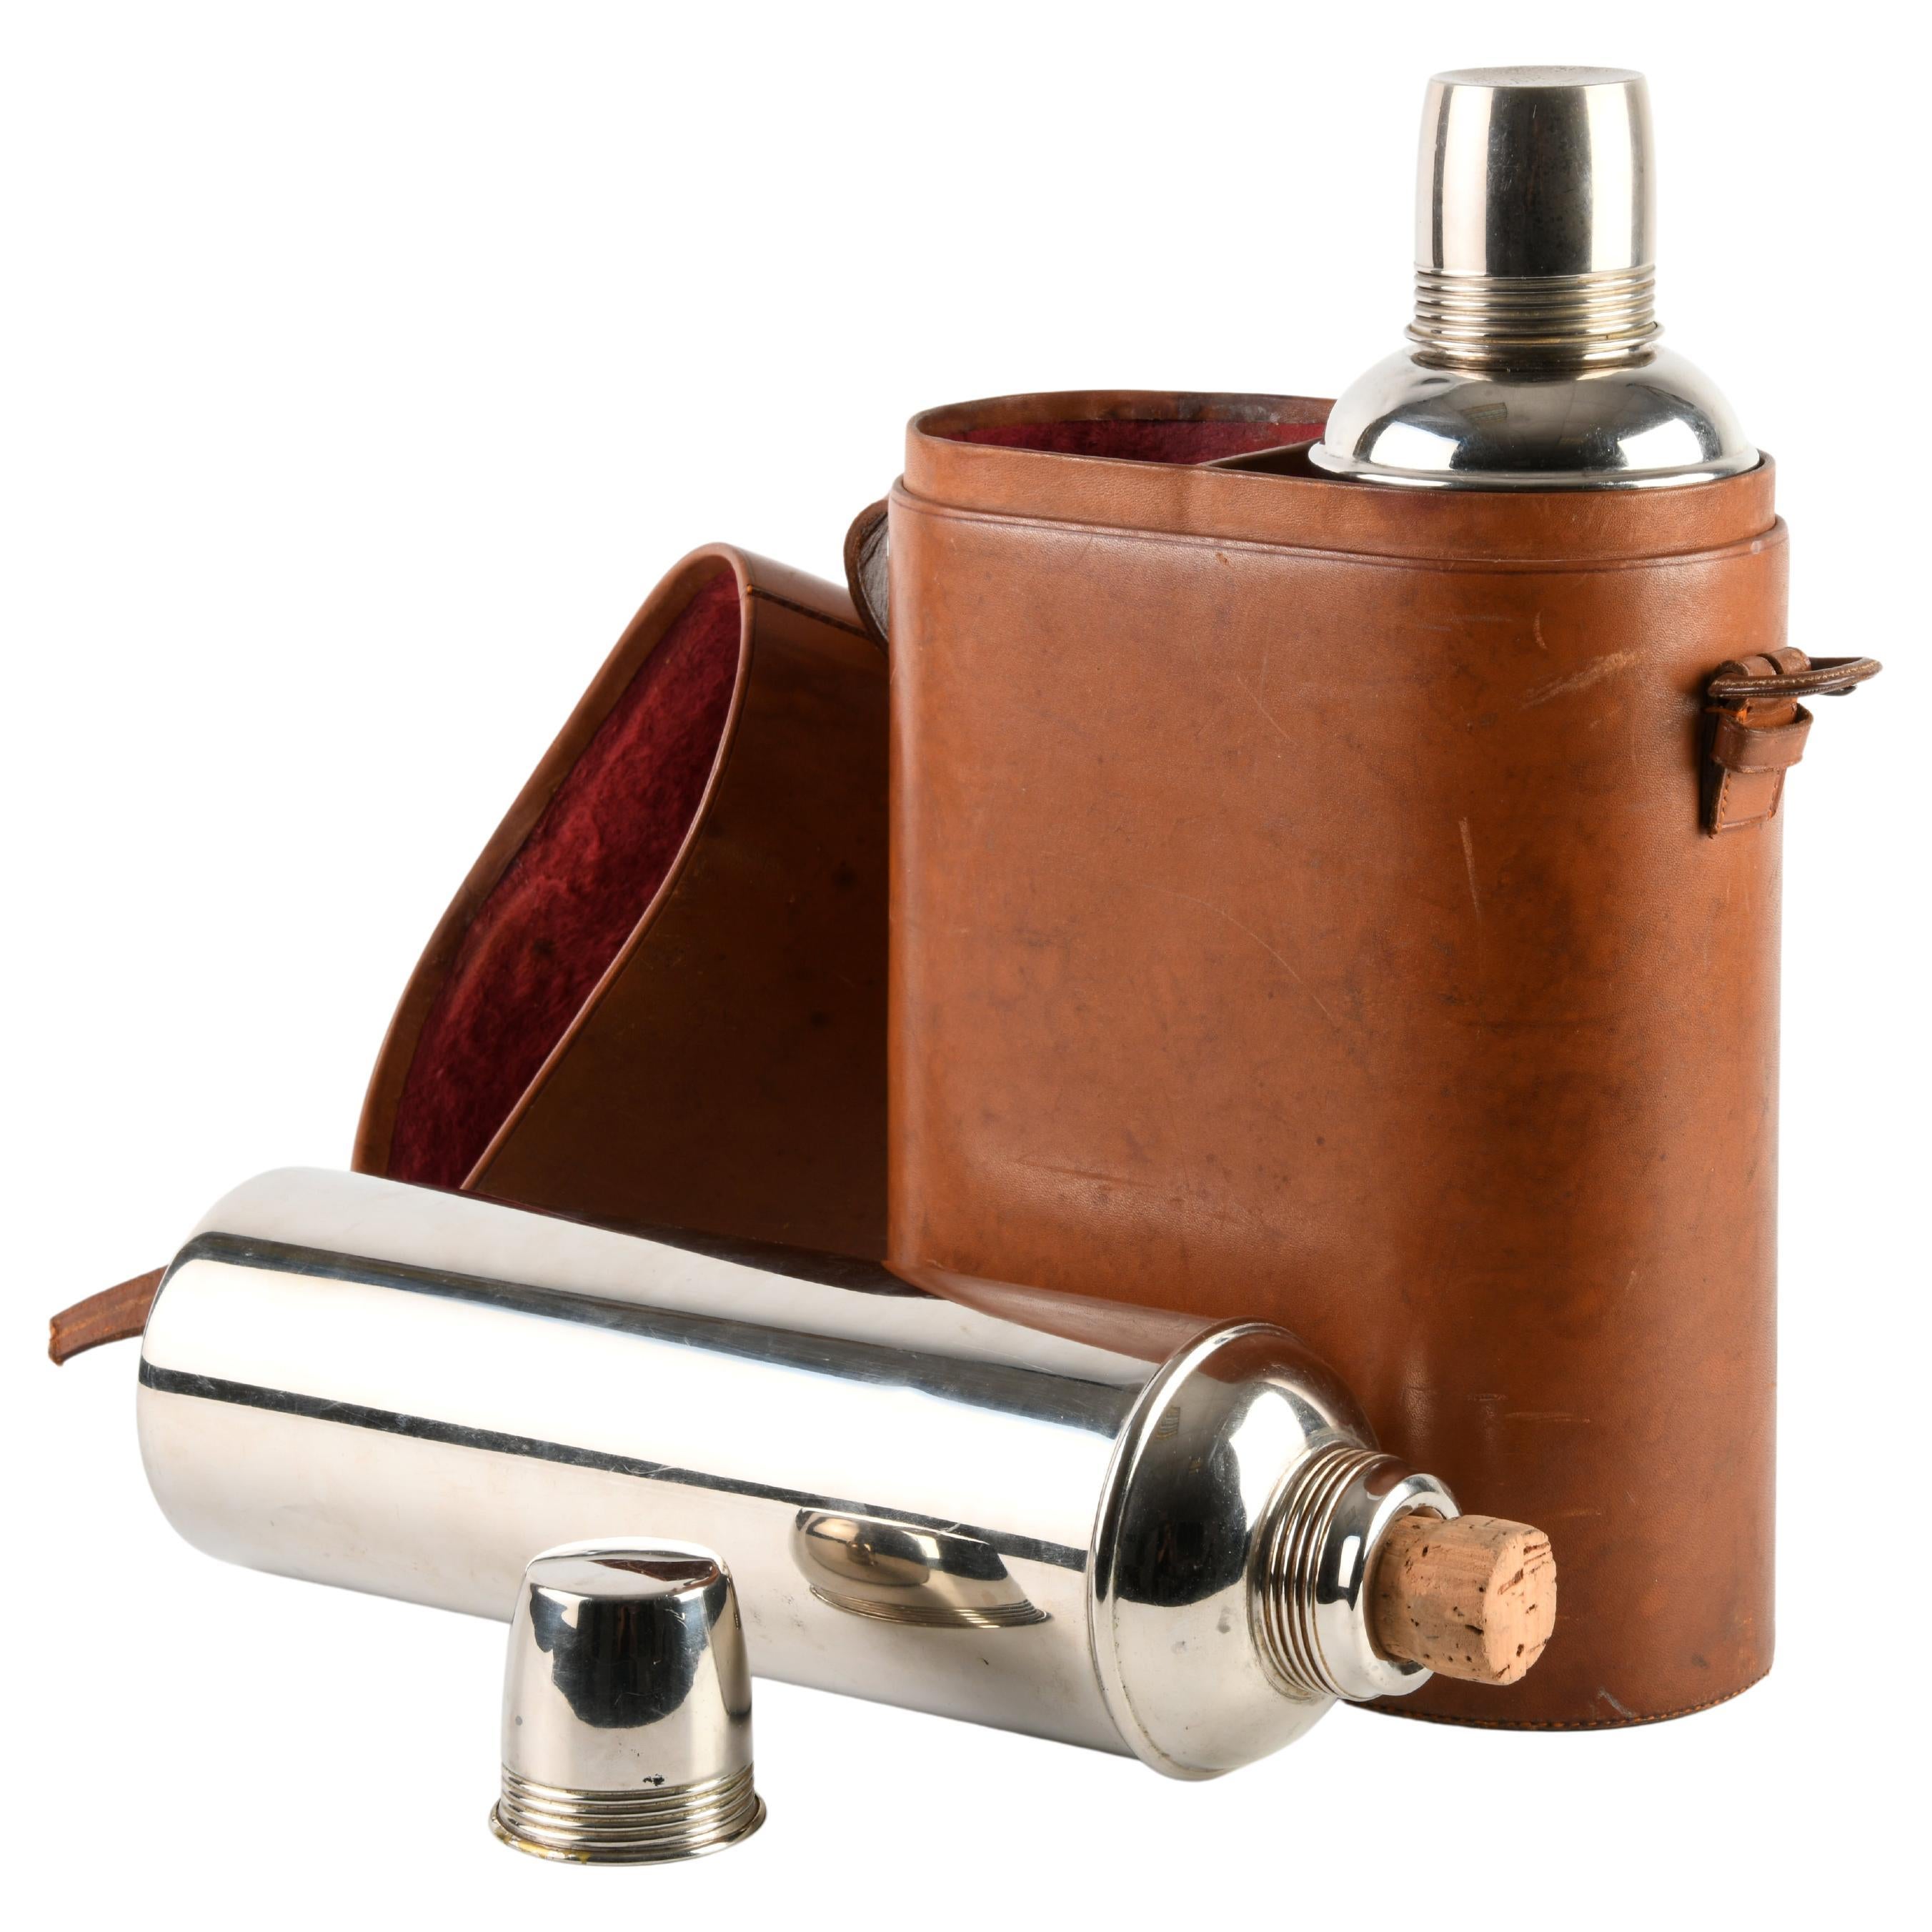 Set of two chrome-plated steel Thermos flasks, in a velvet-lined leather case